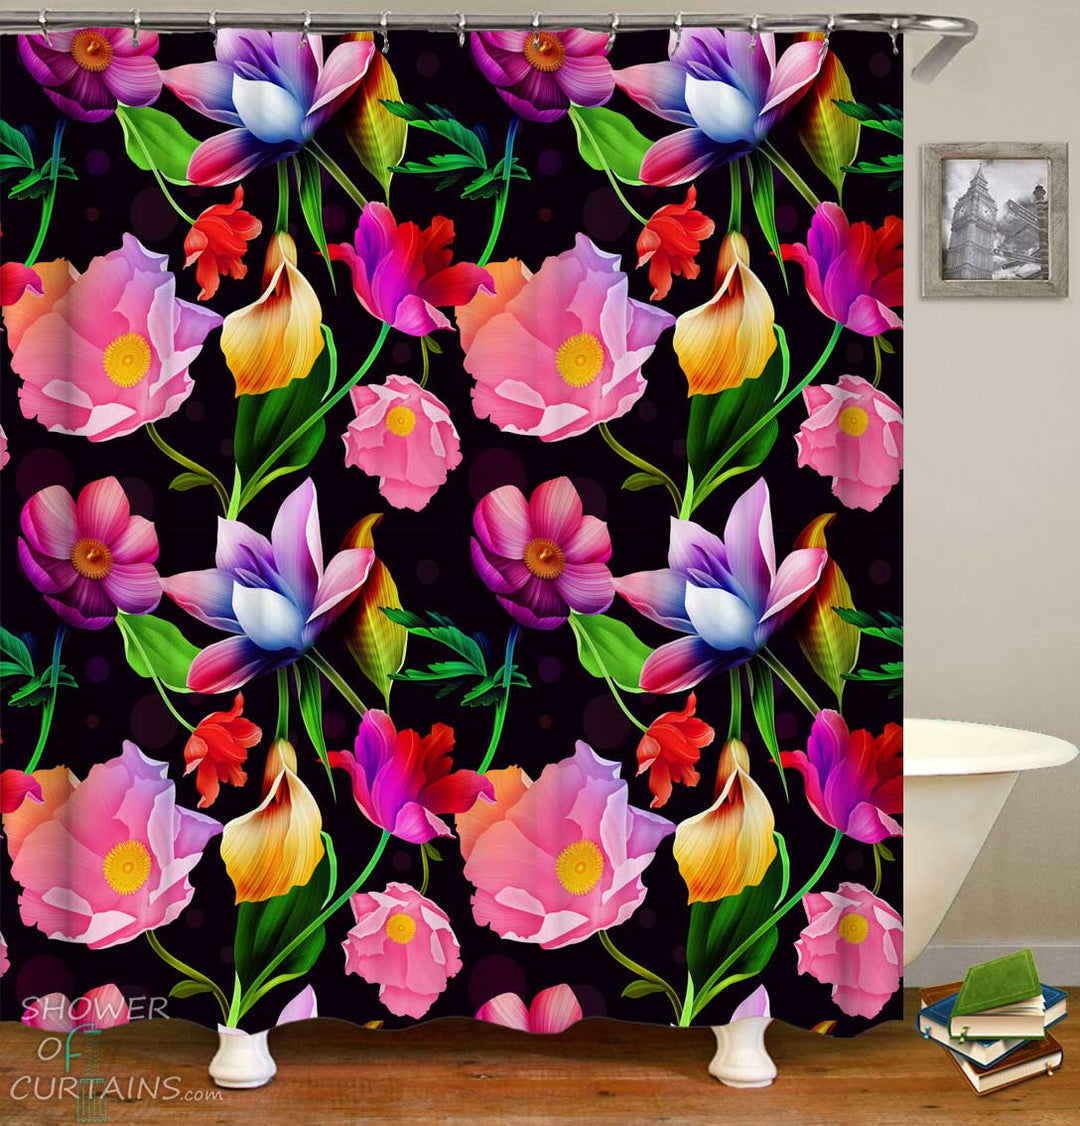 Shower Curtains with Floral Revival over Black